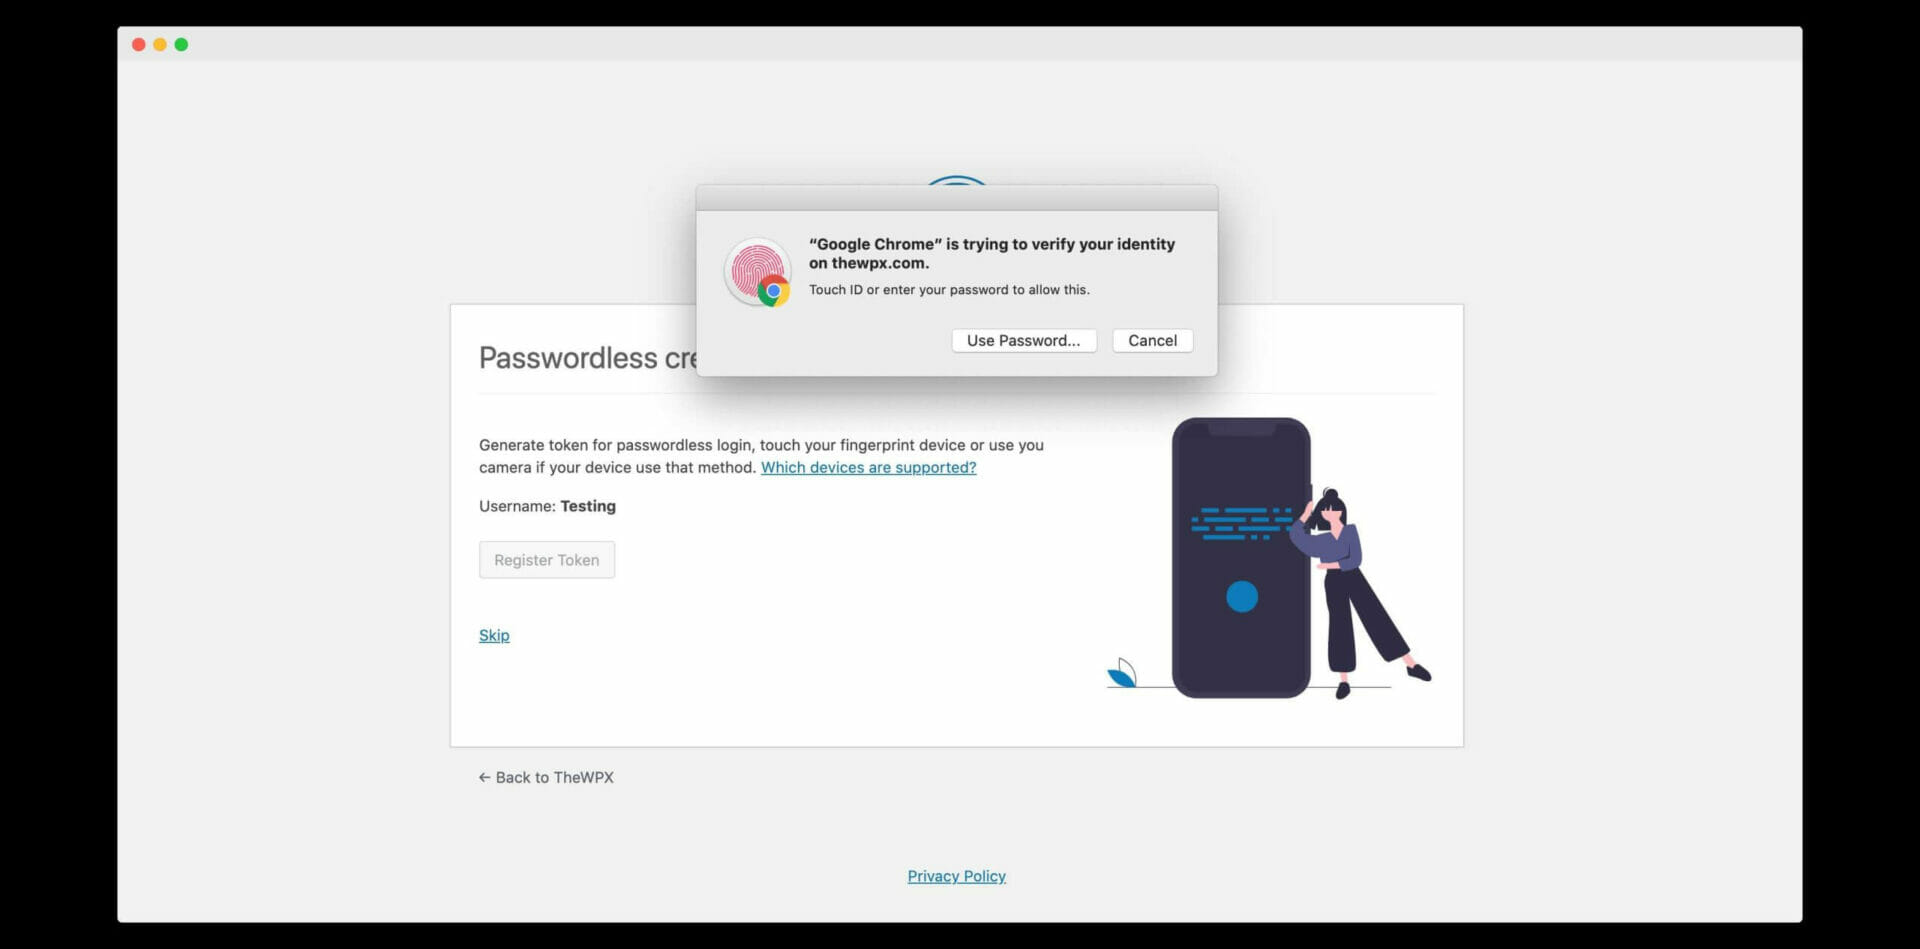 enabling passwordless authentication with touch id on my device